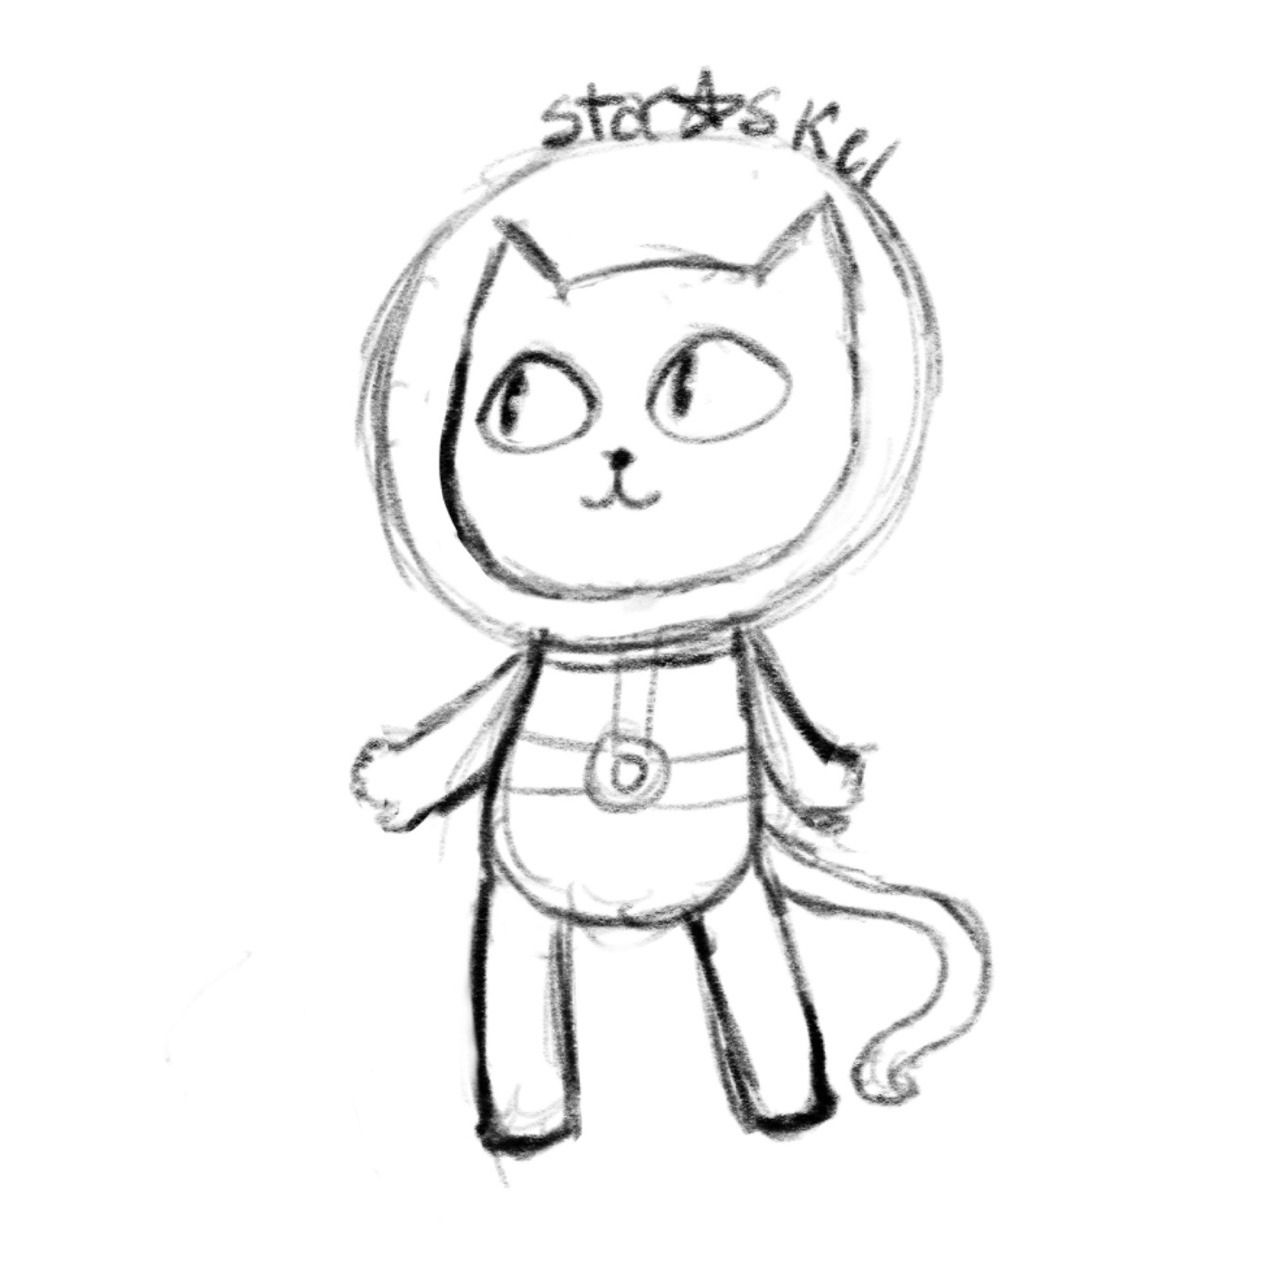 I actually did something productive today and drew a decent Cookie Cat! Maybe if I color this in and it actually looks good, I’ll enter it into CN’s merch contest.